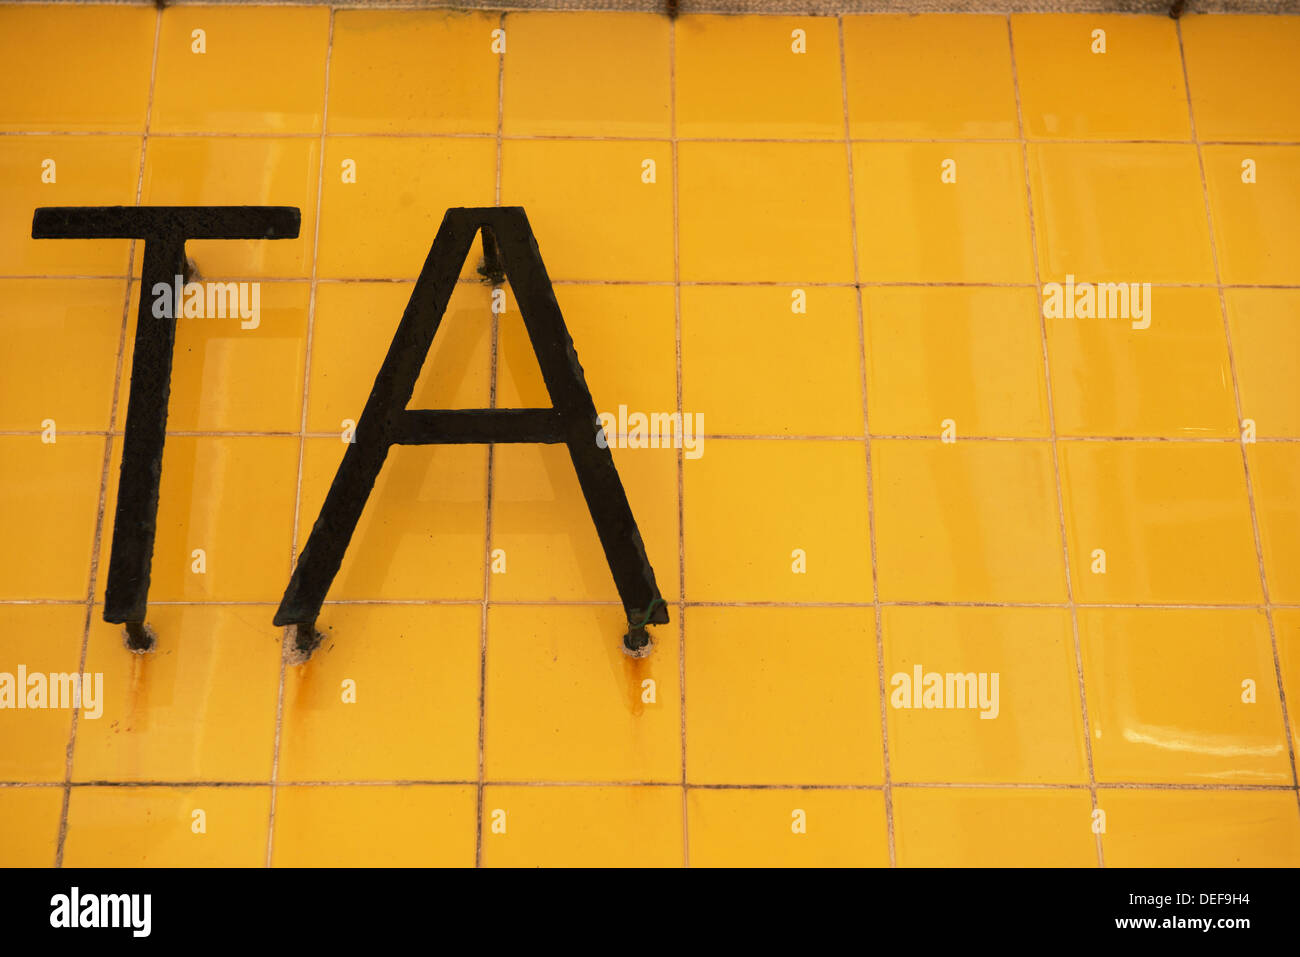 Ta, written with metal letters on a yellow tiled wall Stock Photo